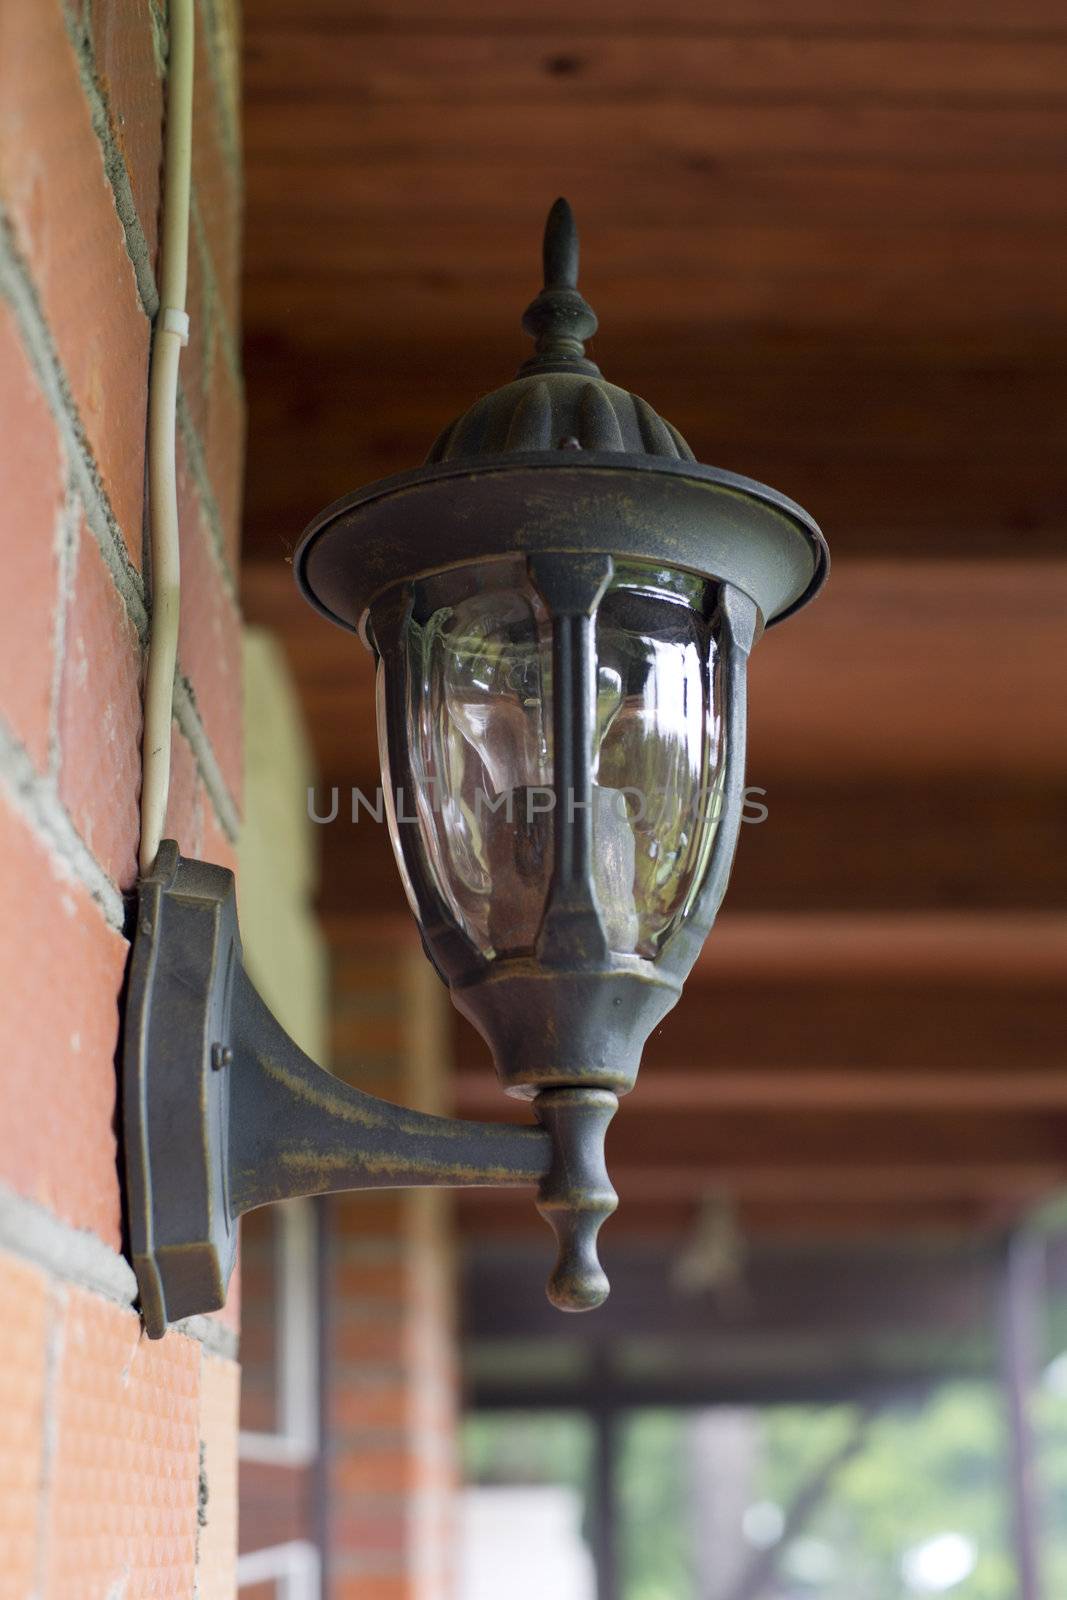 Lamp in retro style on brick wall by vetdoctor